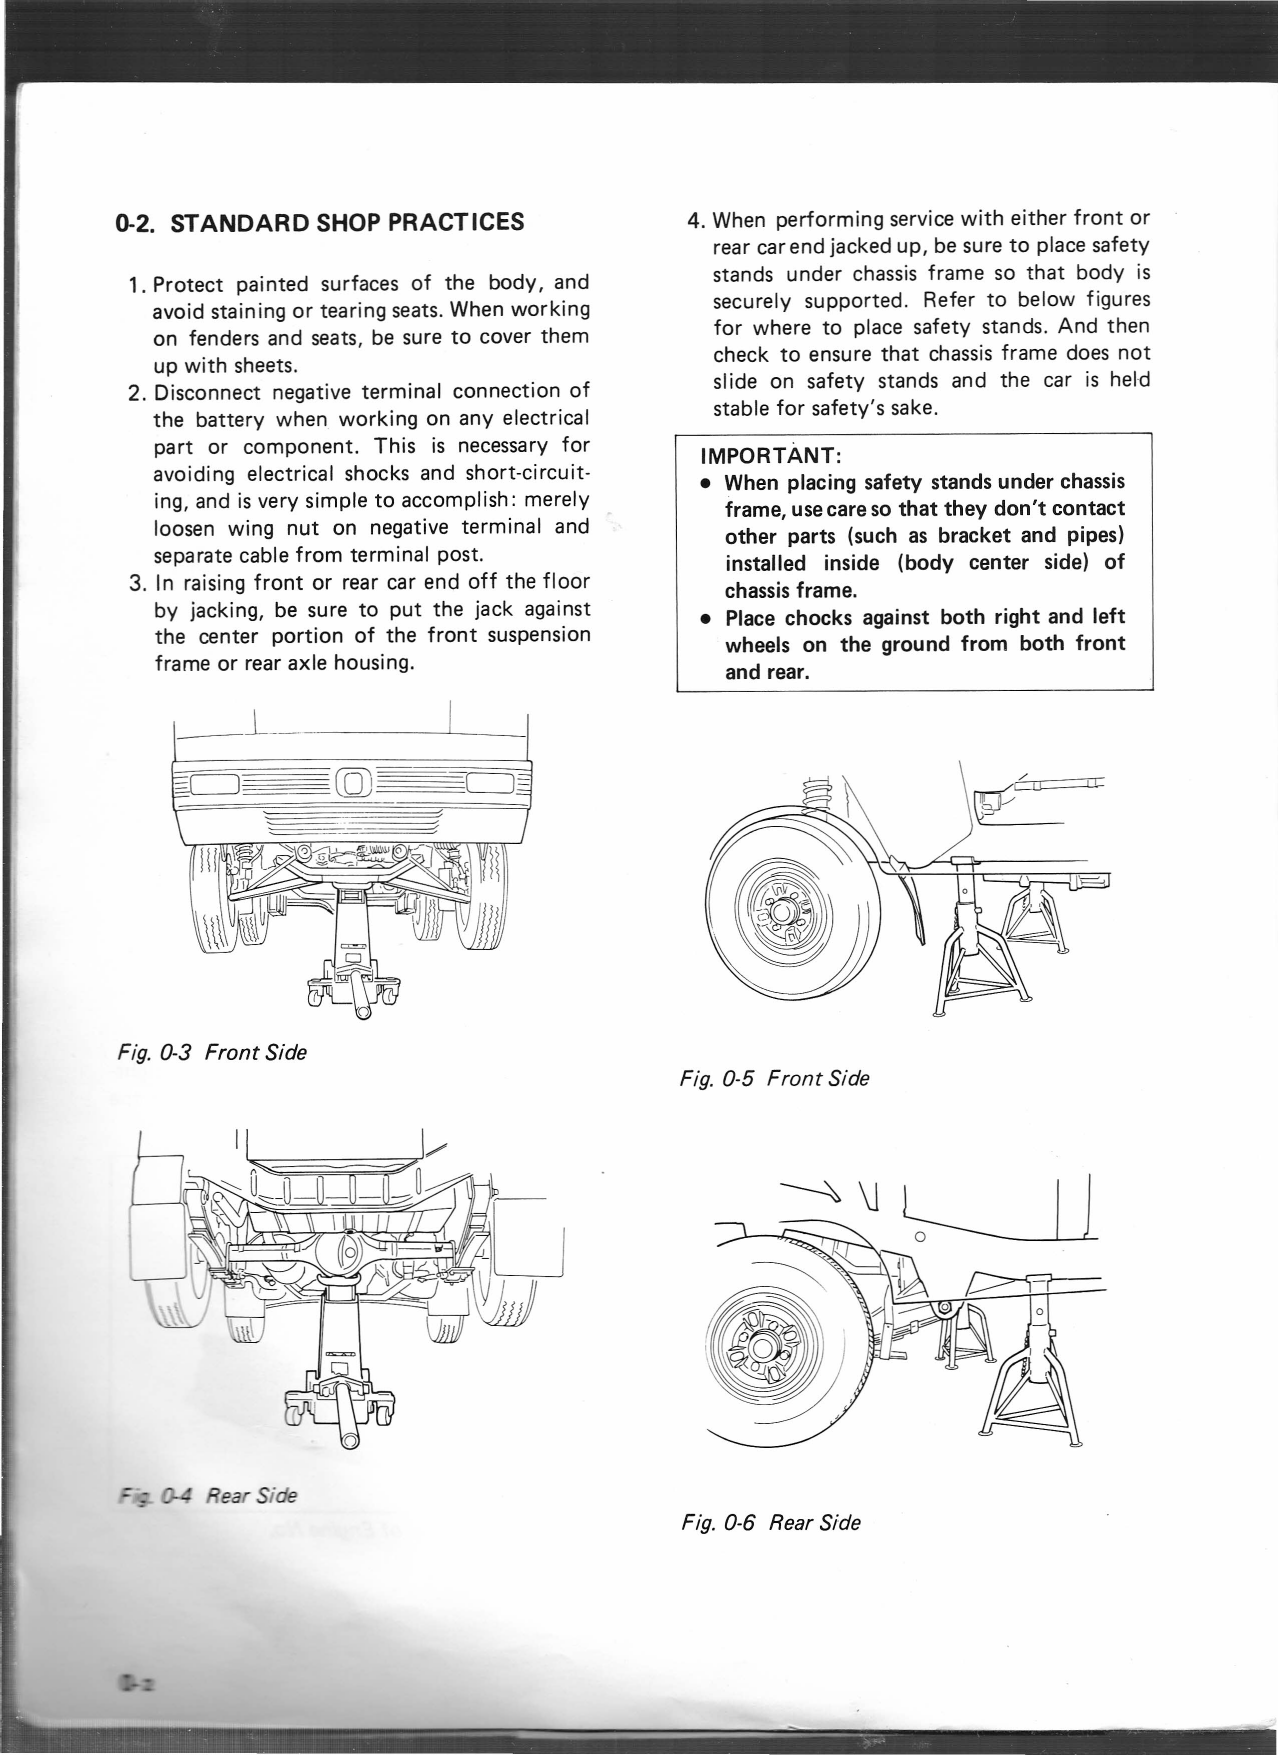 1985-1991 Suzuki Carry manual Preview image 3